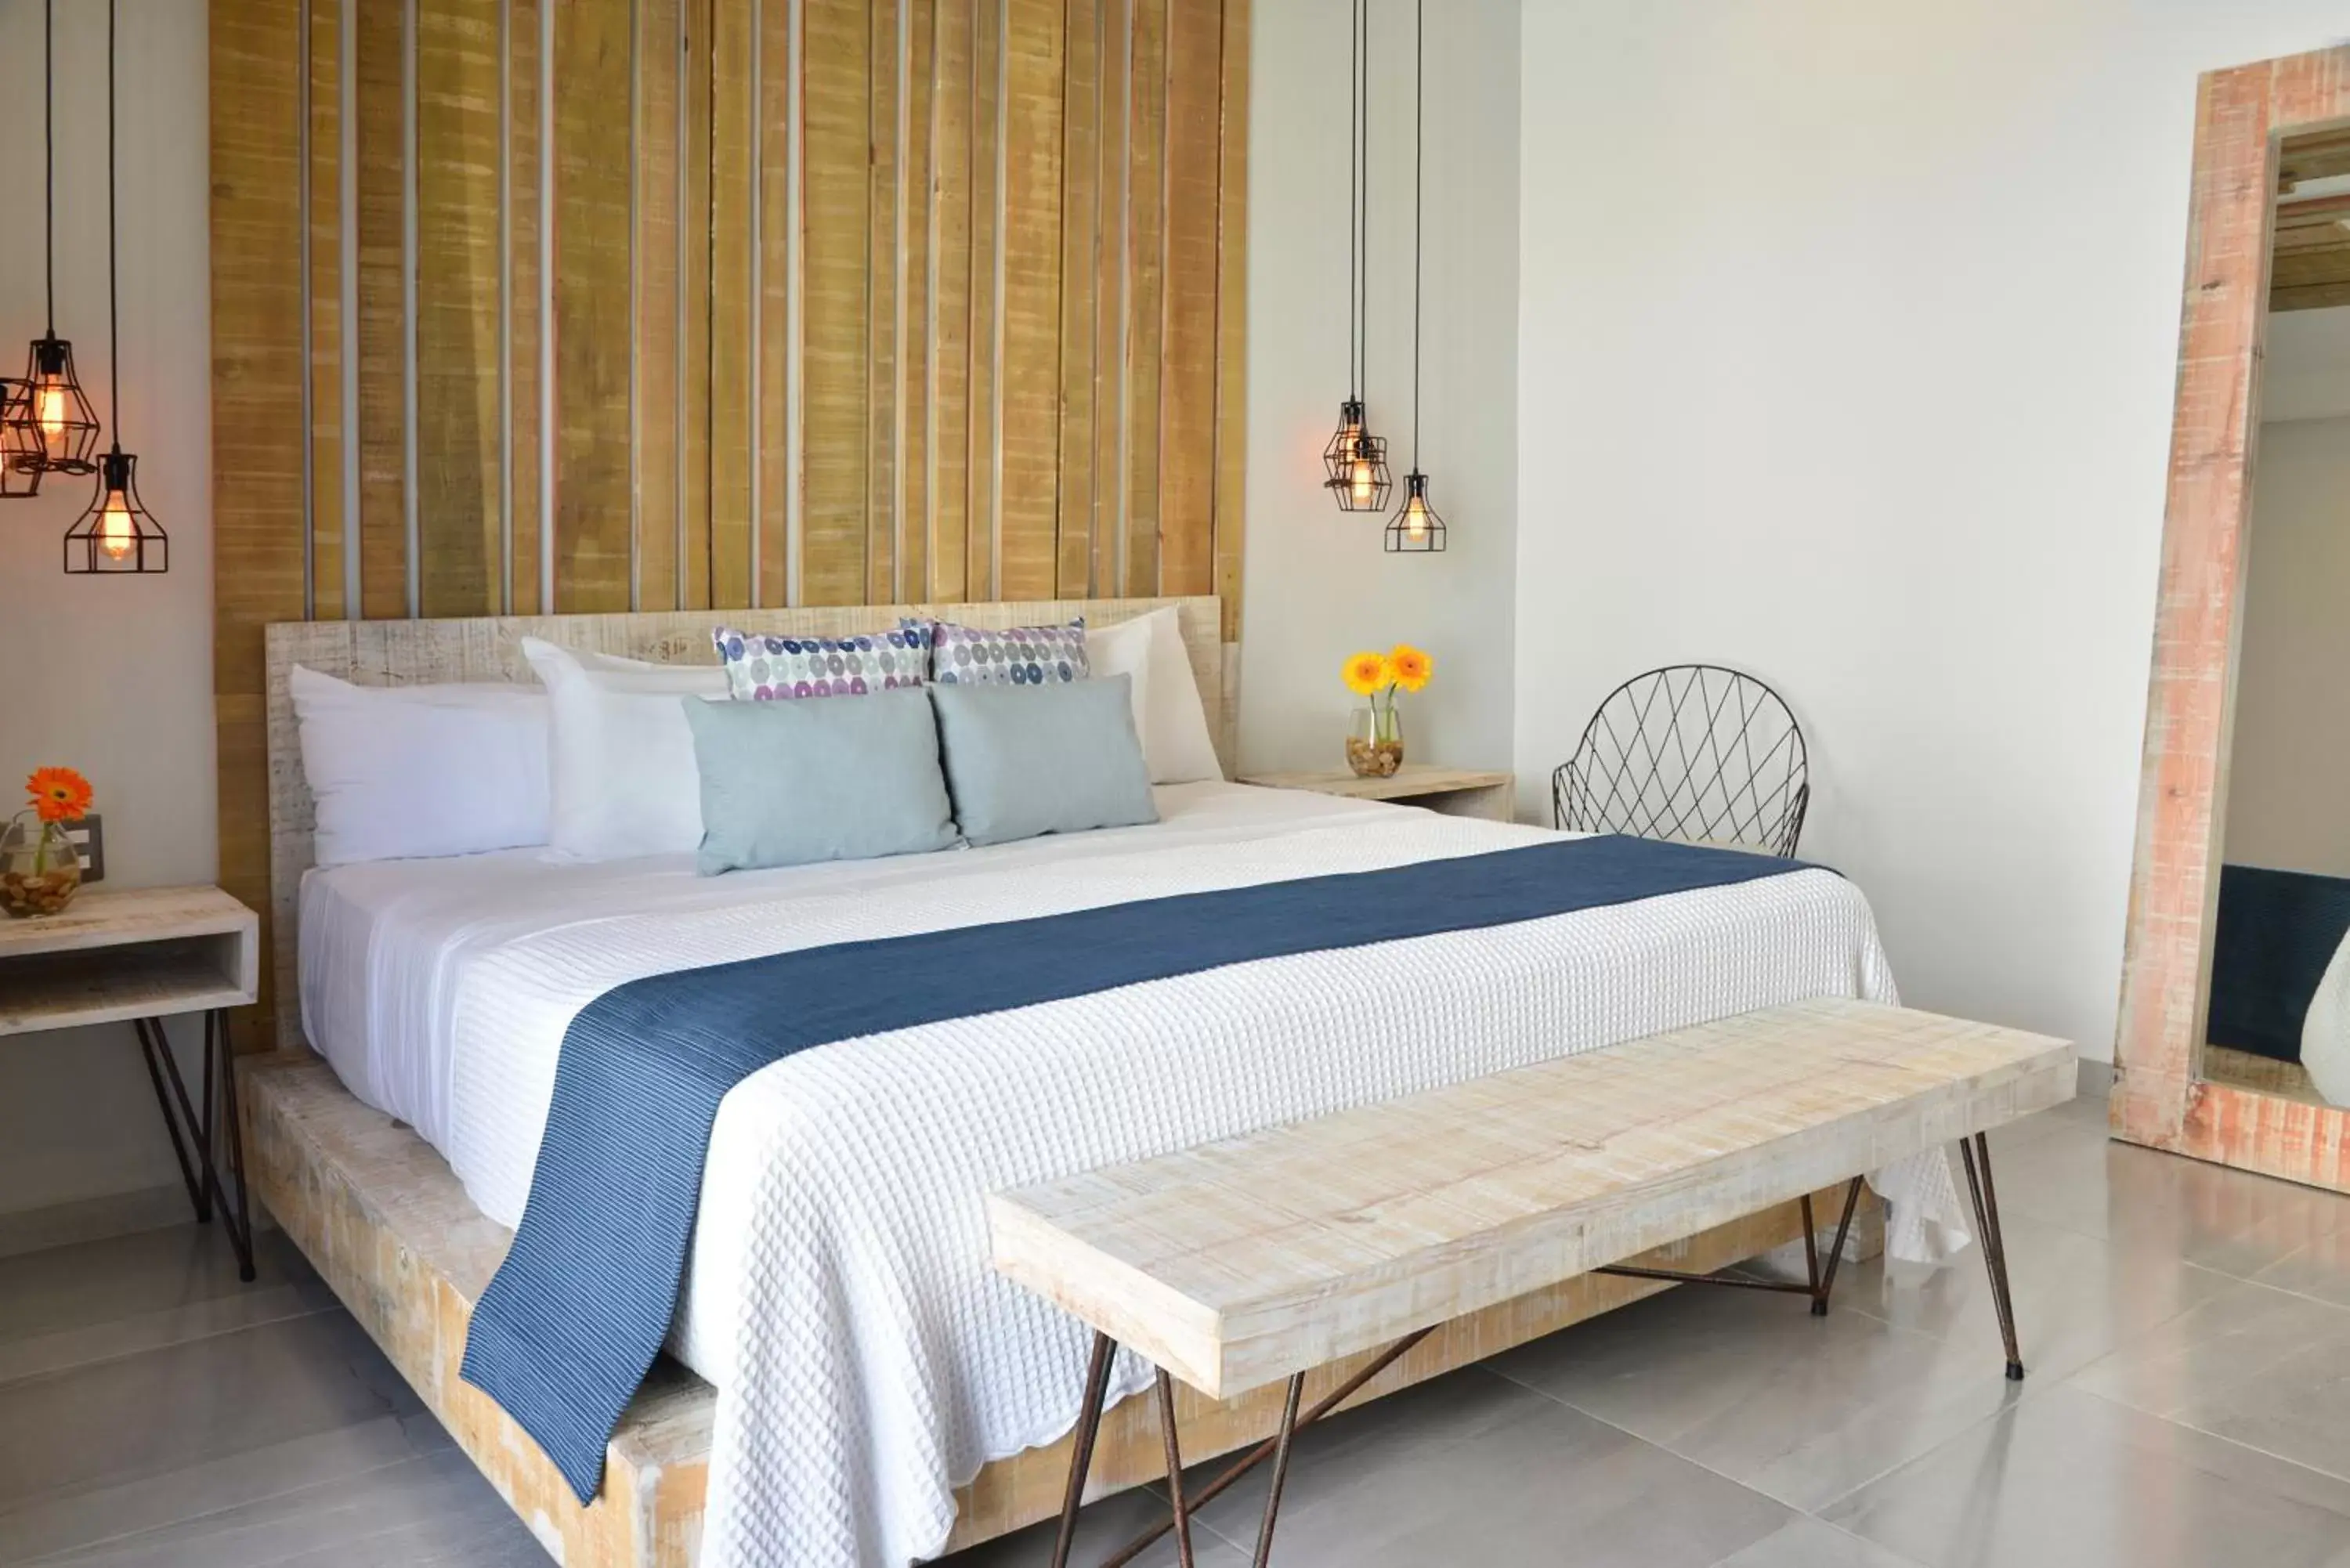 Bed in Elements Tulum Boutique Hotel